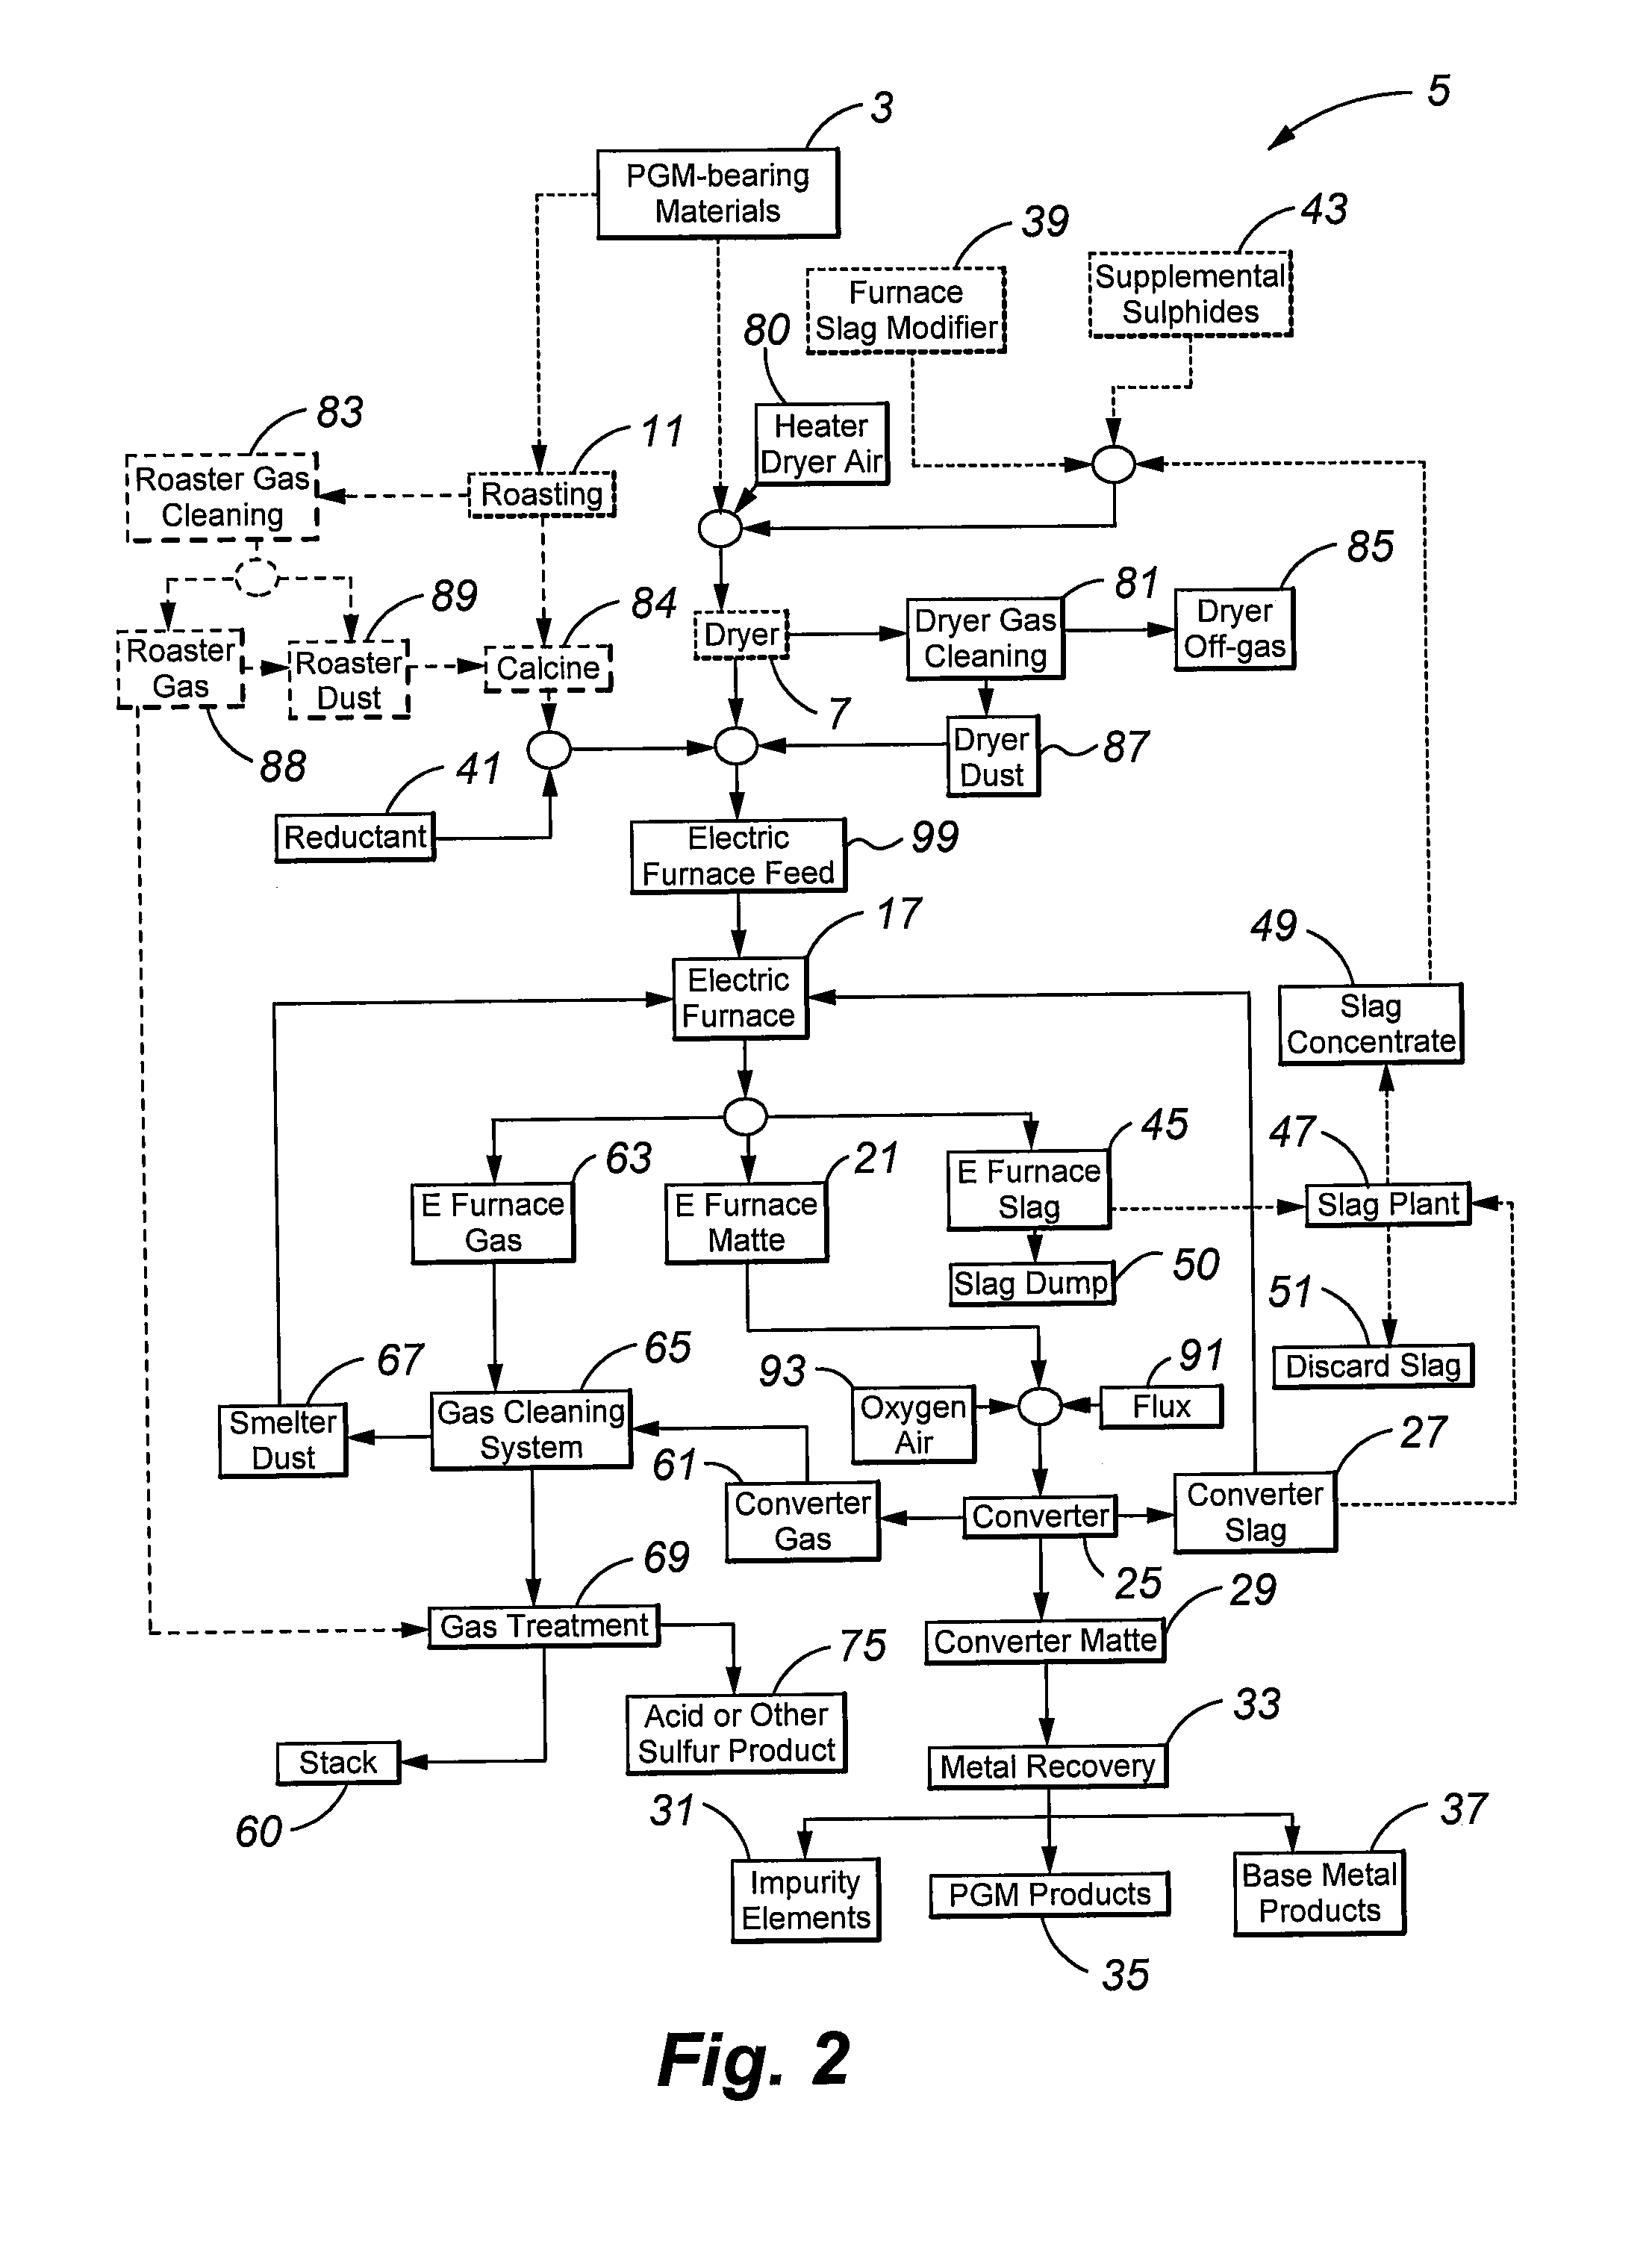 Process for recovering platinum group metals using reductants